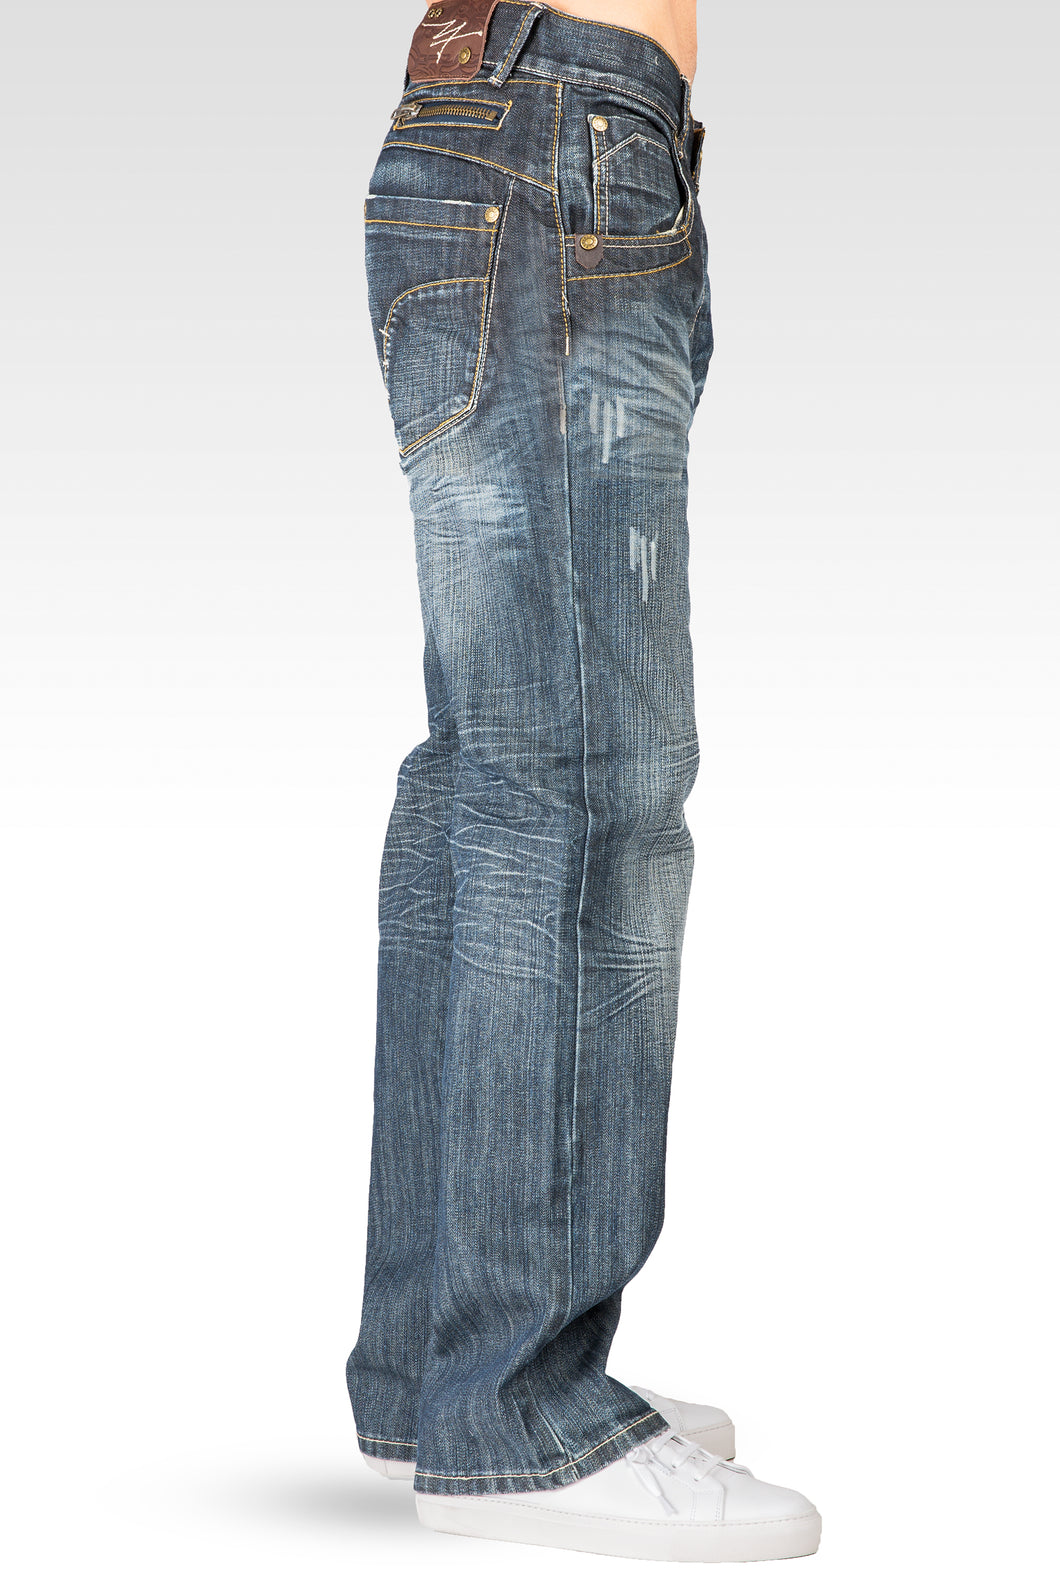 mens bootcut ripped jeans